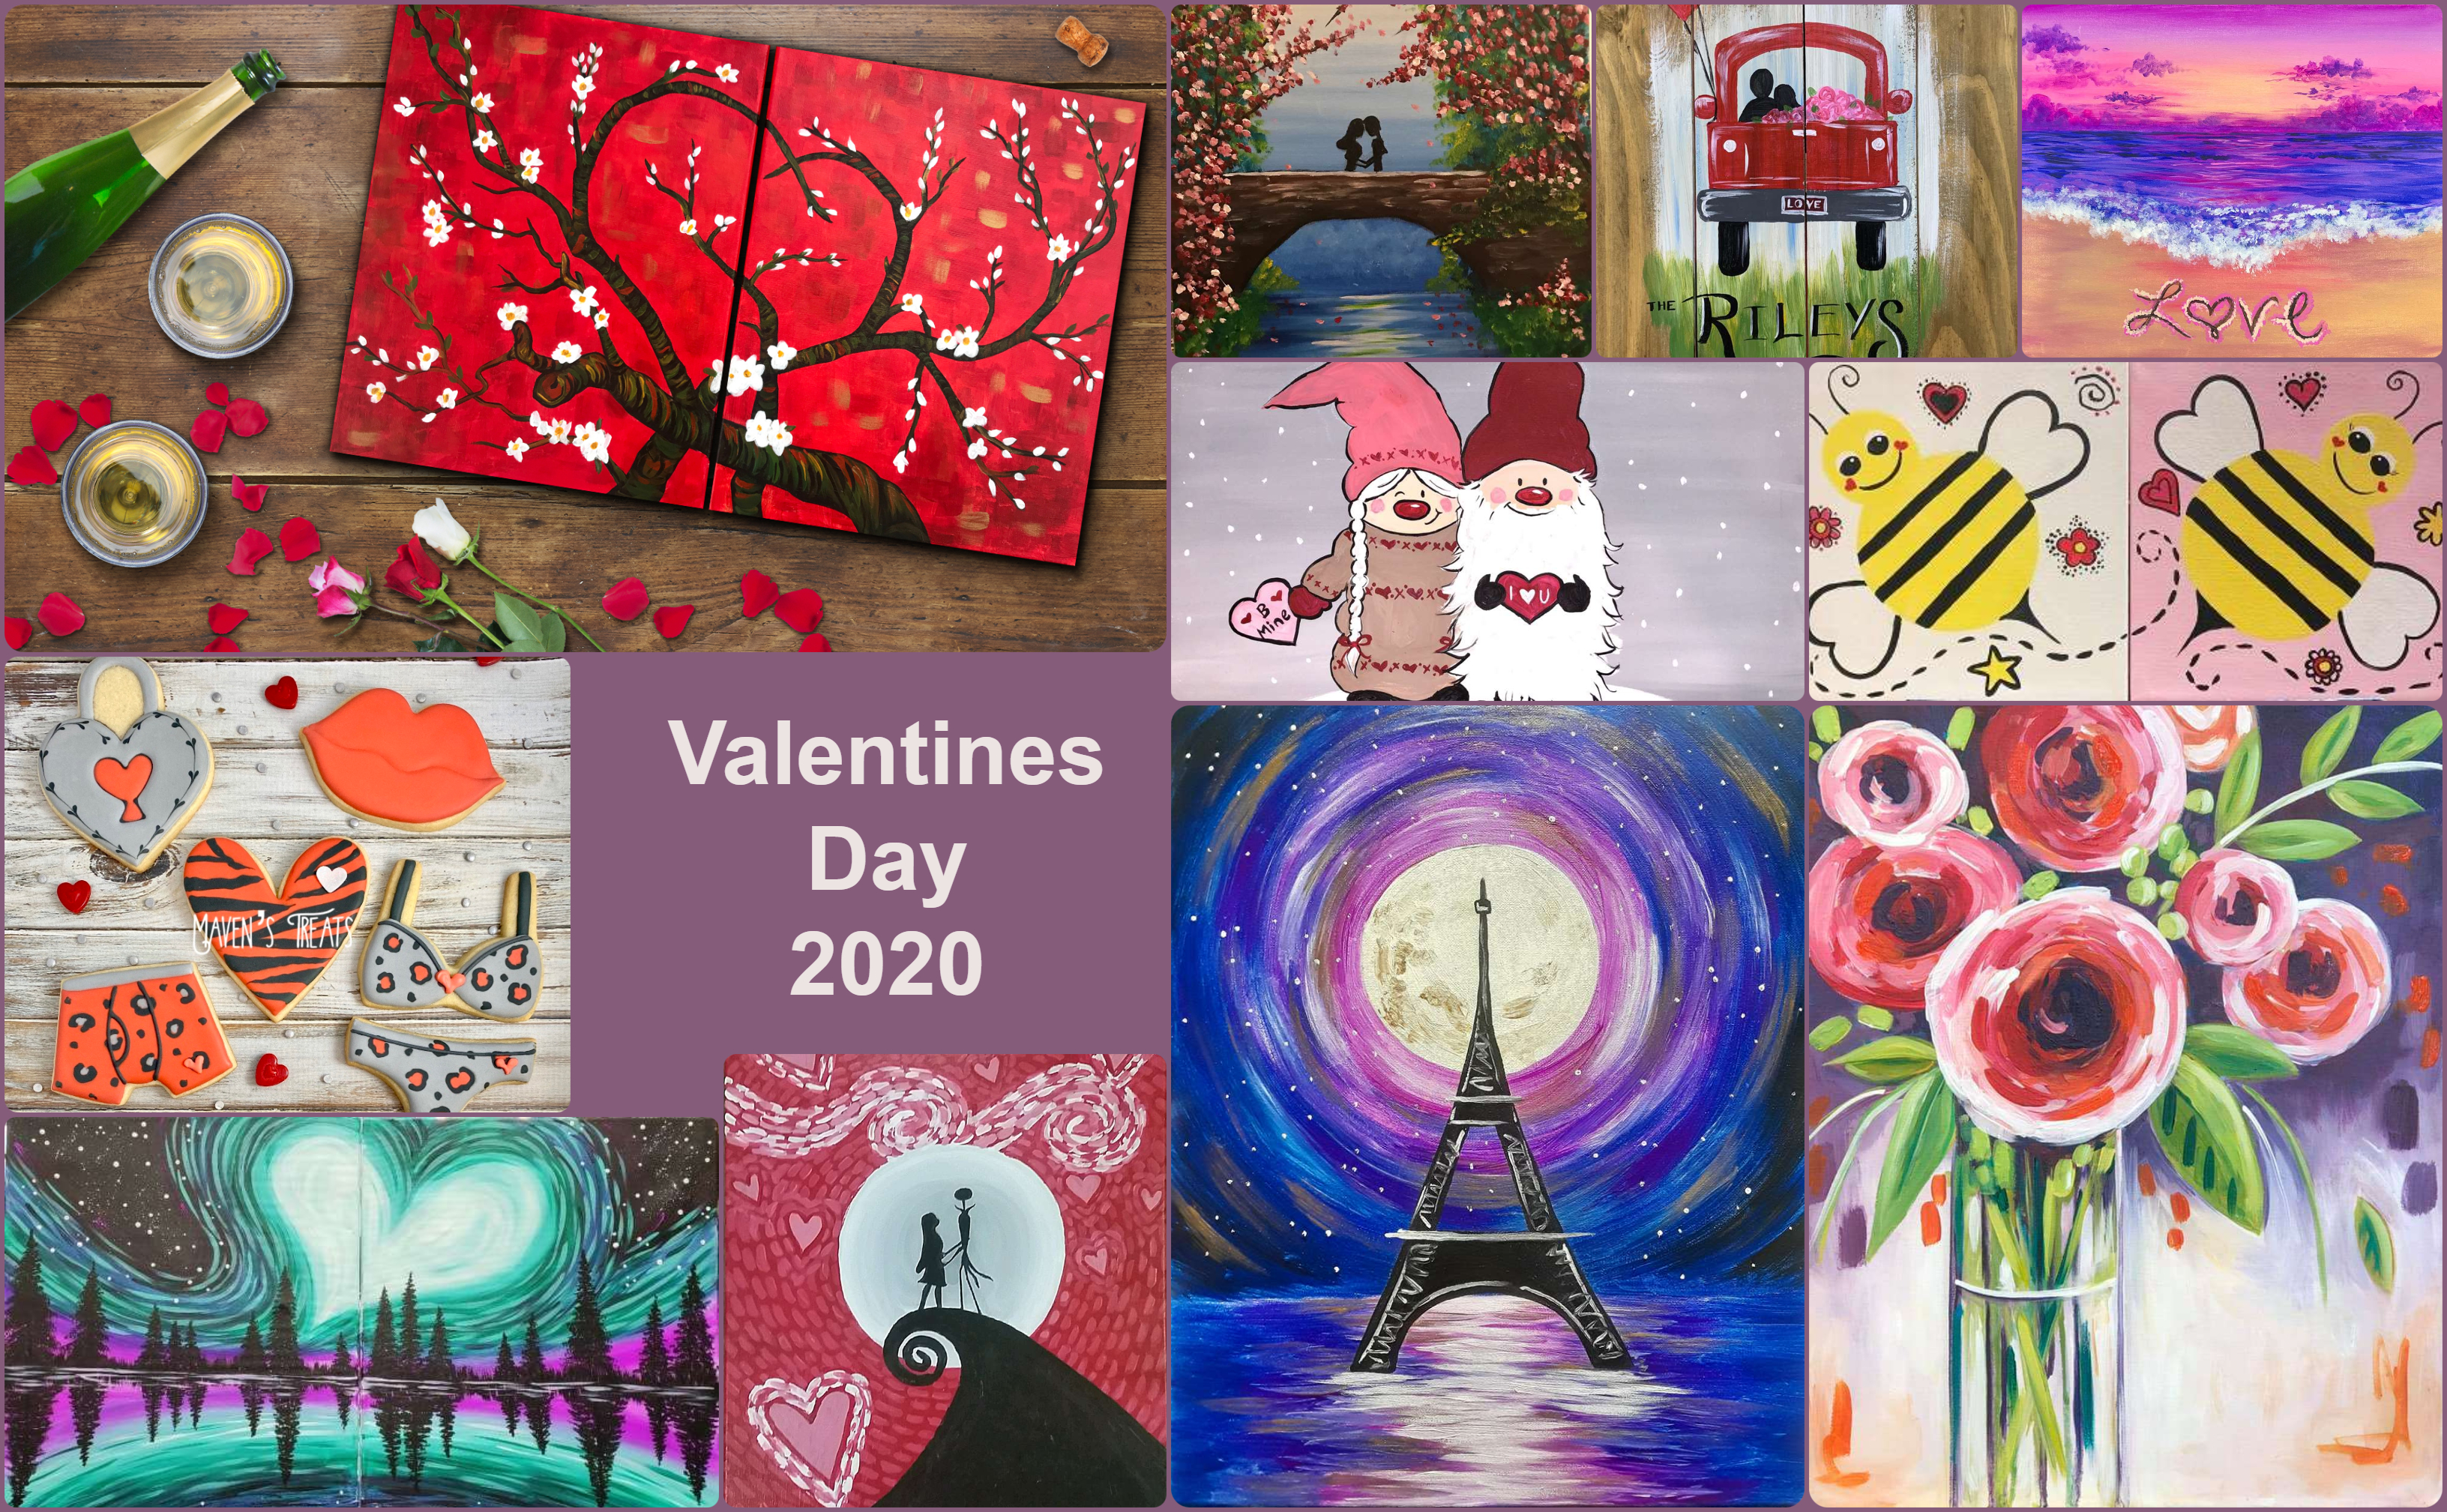 Valentine's Day Events at Pinot's Palette